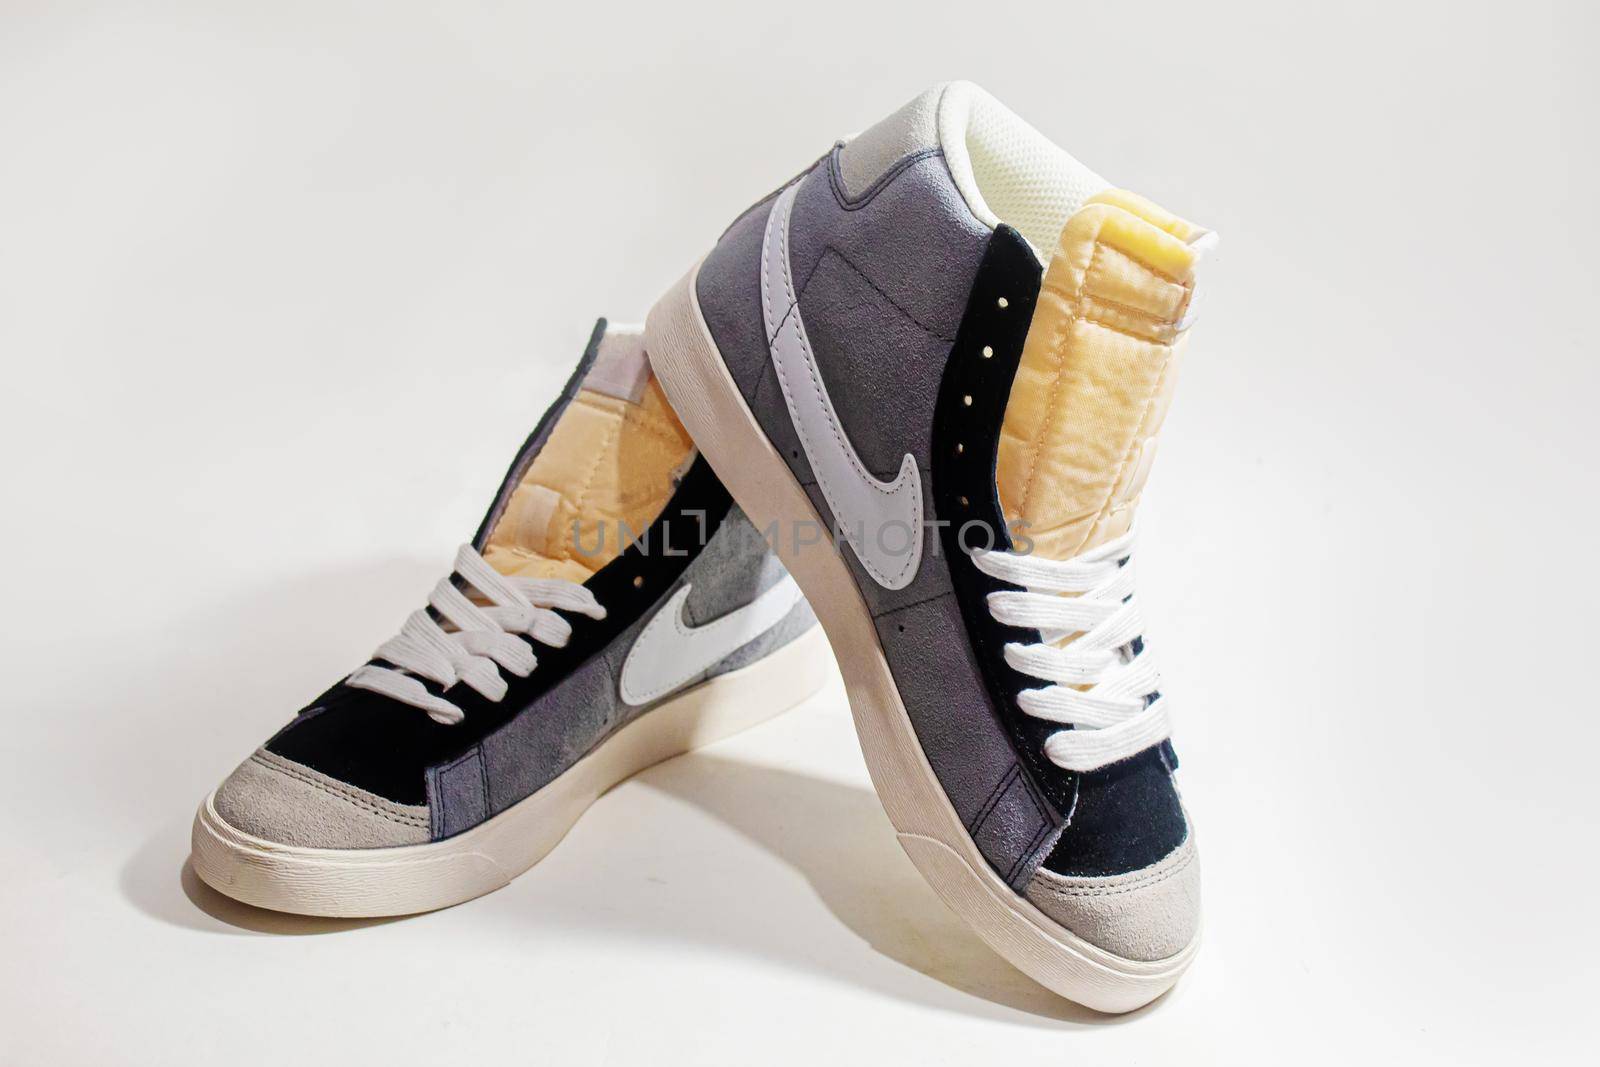 sneakers on white background. selective focus.sports